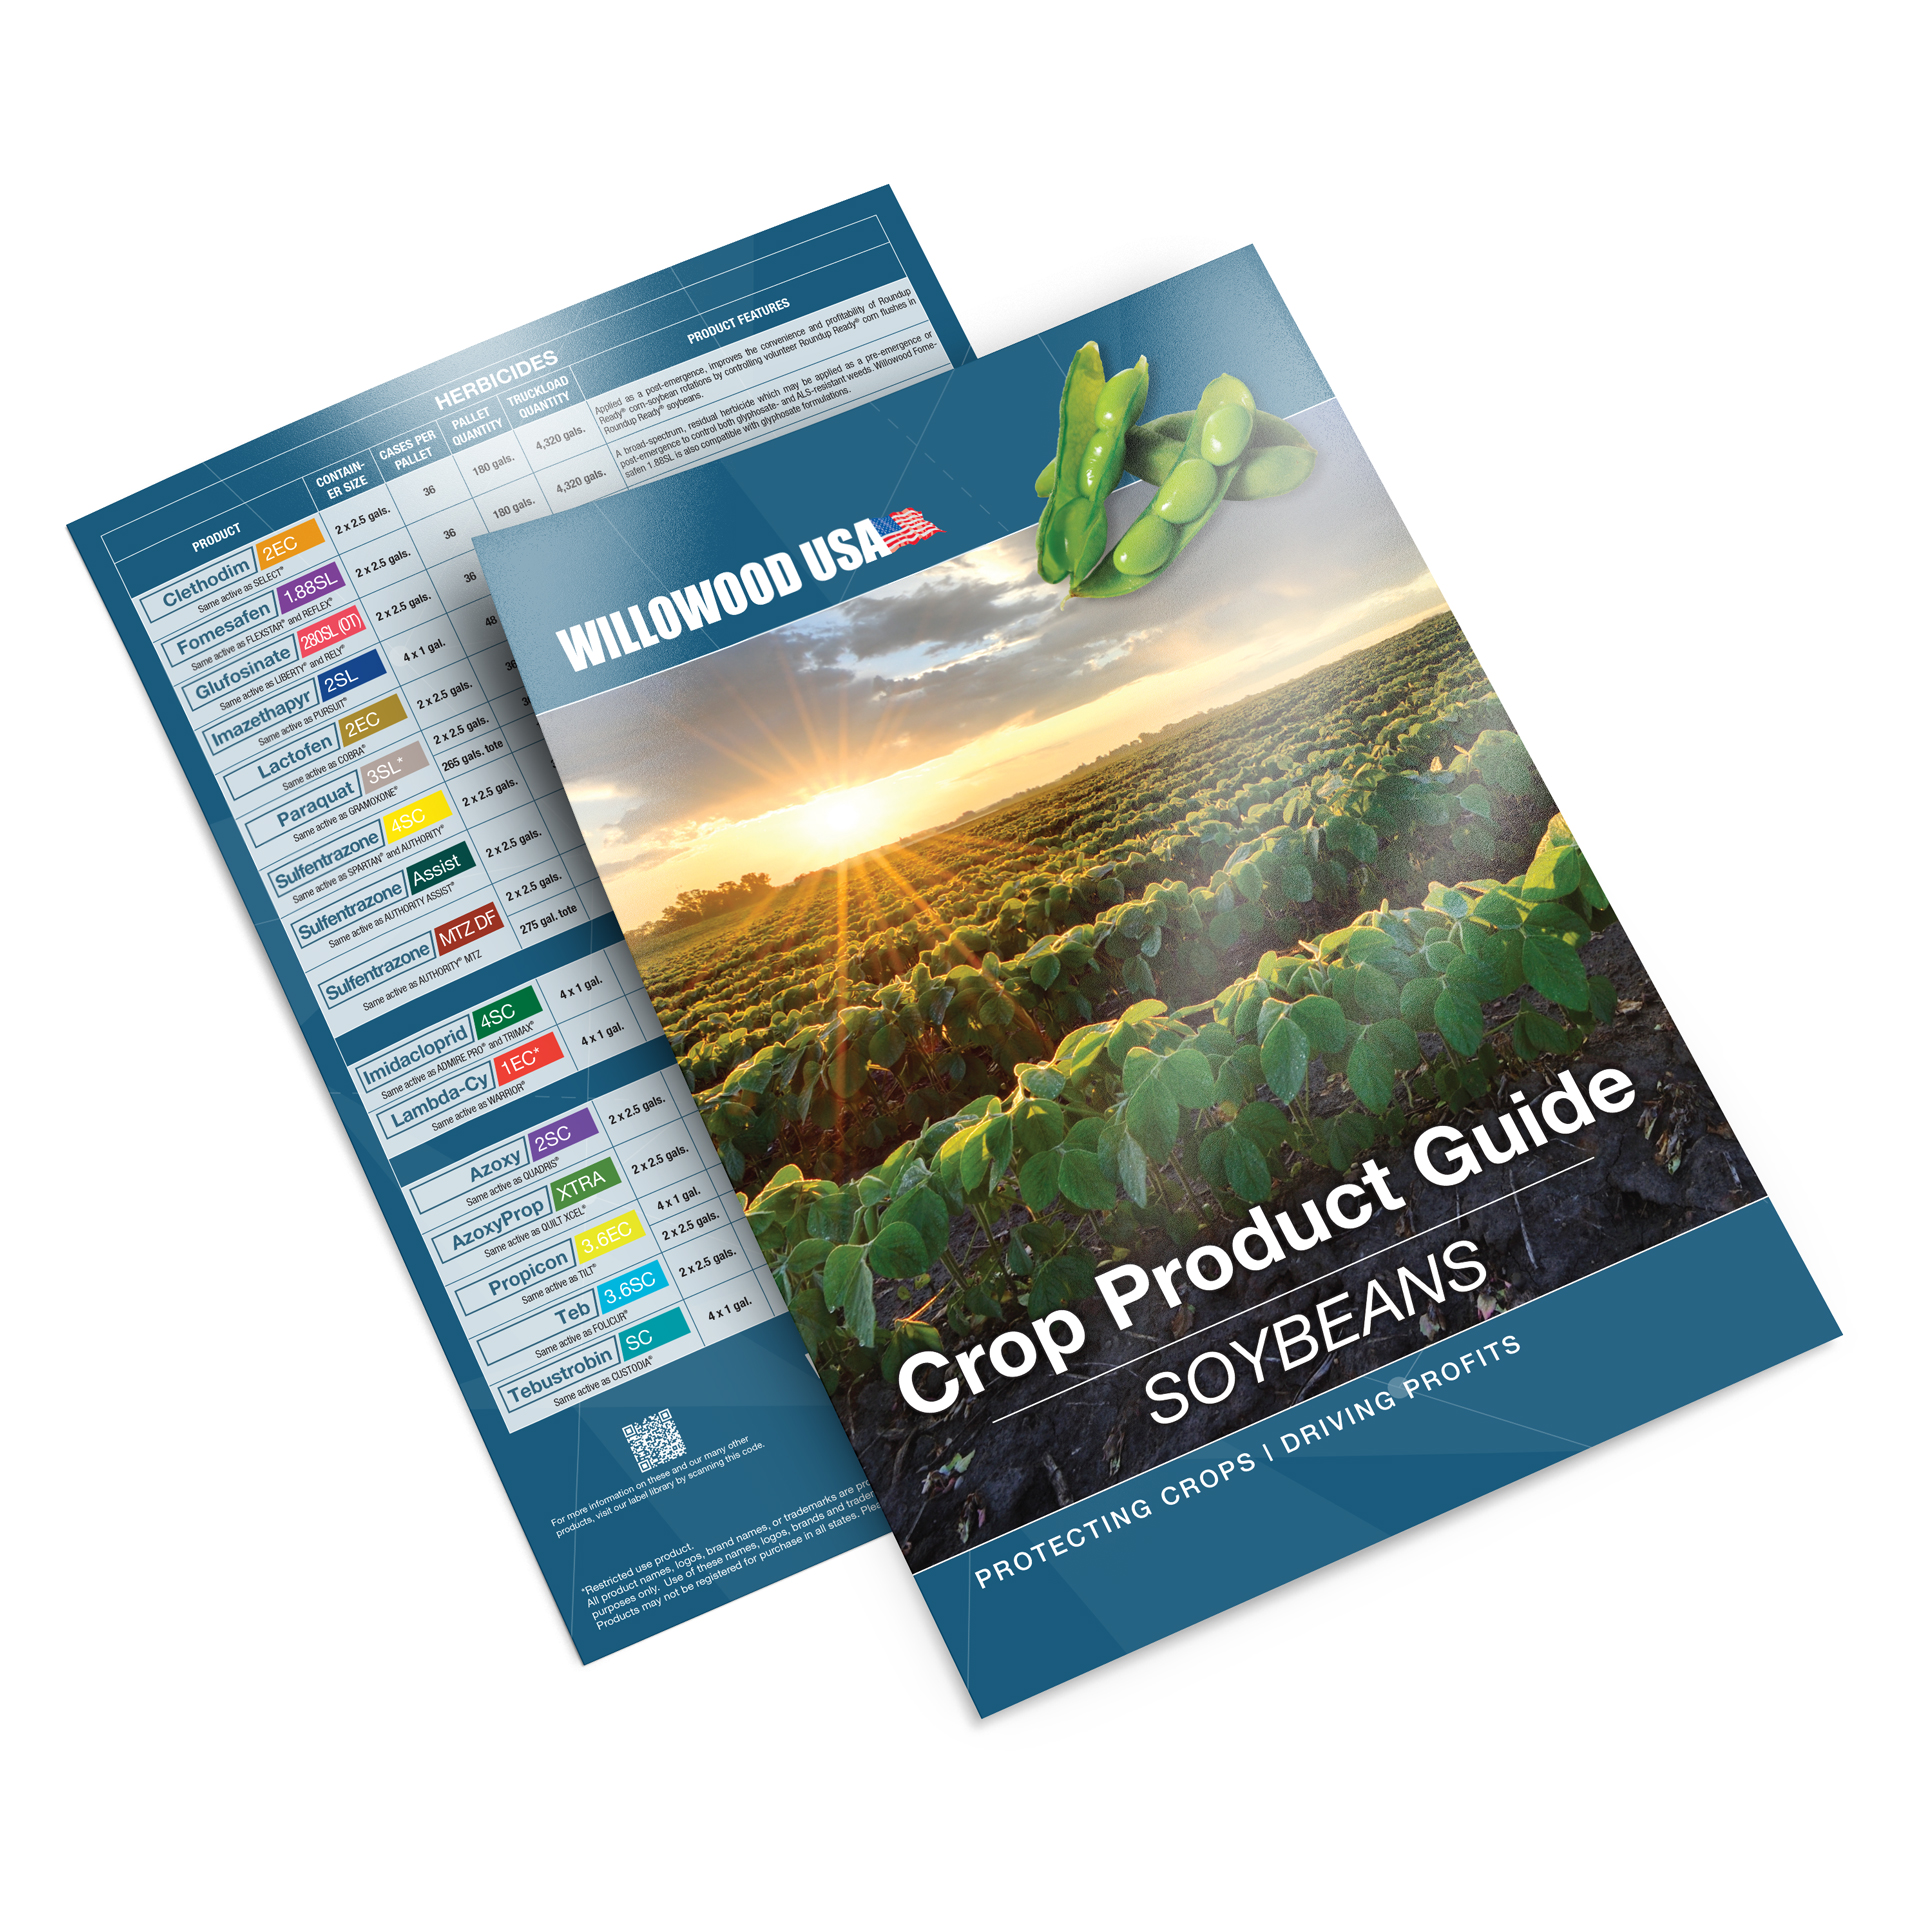 Willowood USA Crop Product Guide – Soybeans